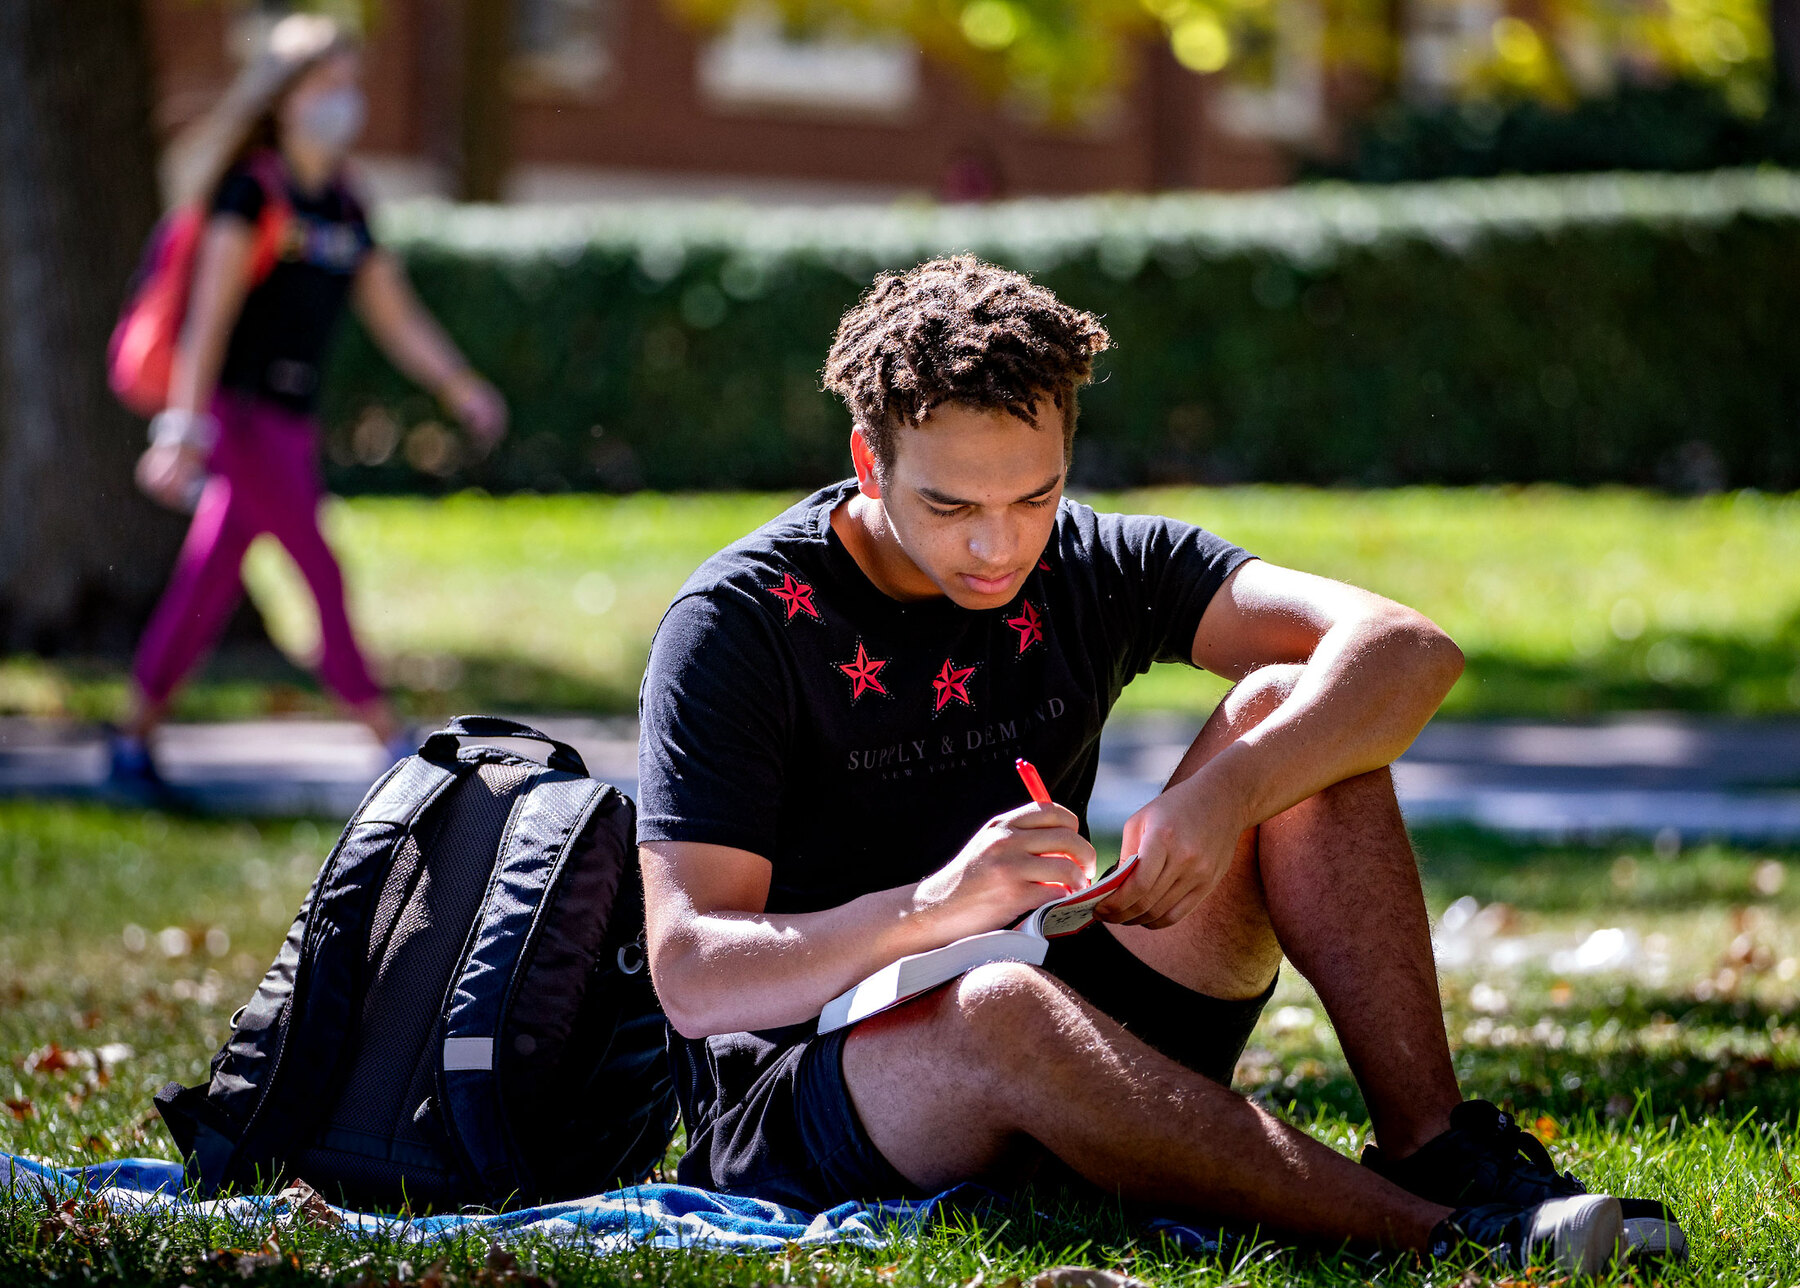 Student in dark shirt with stars sits on the quad and studies.